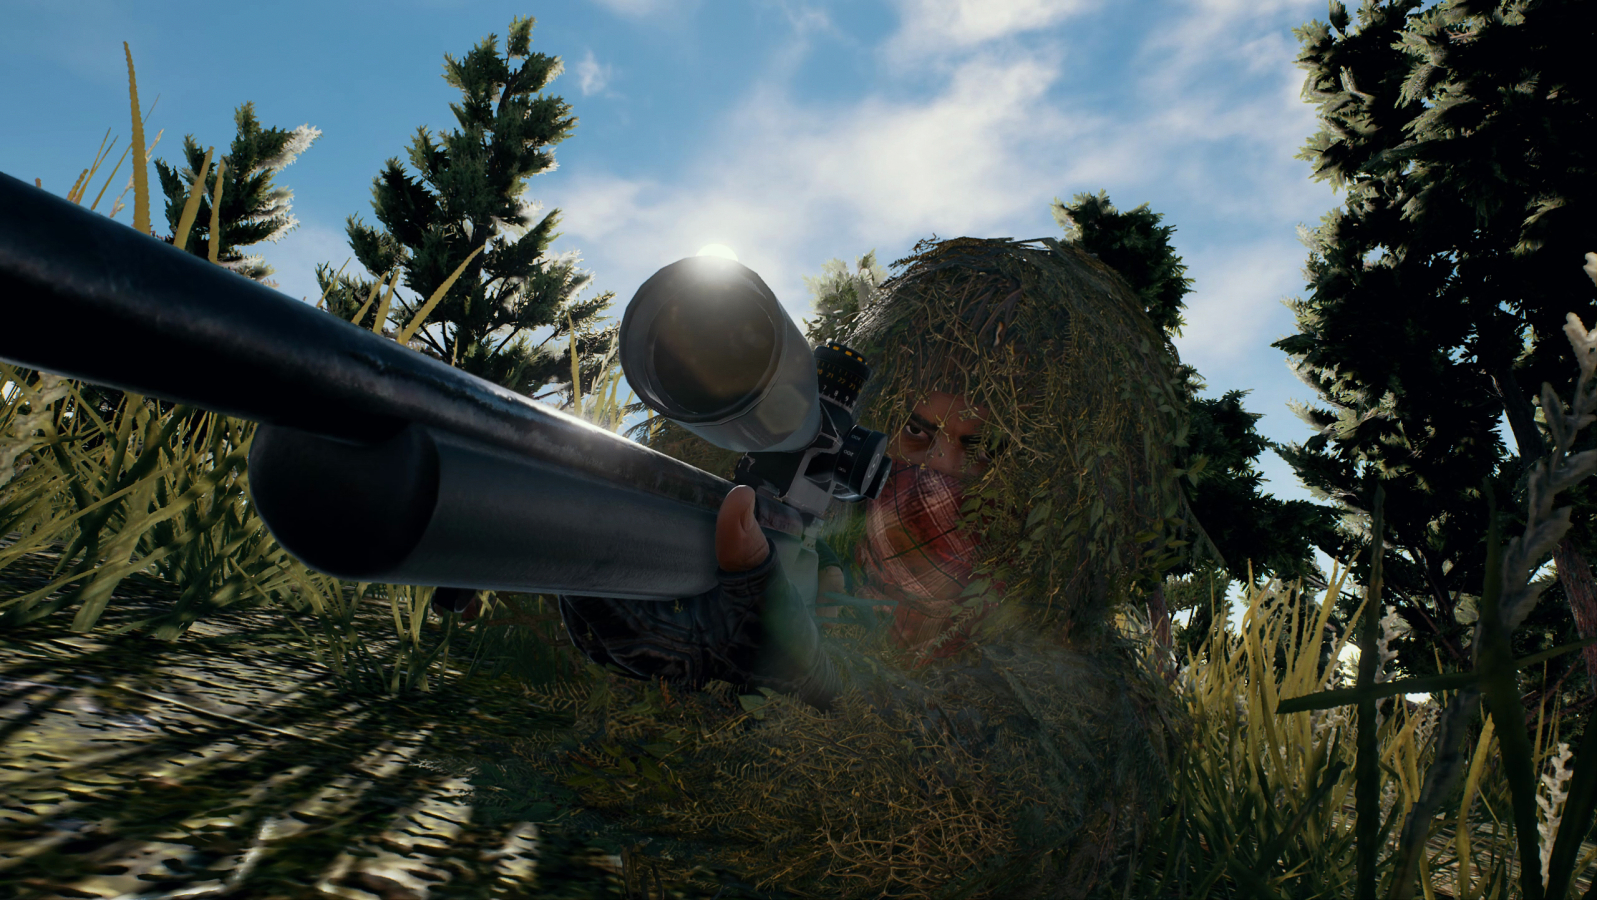 Chinese Pubg Hack Developers Have Been Arrested And Fined 5 Million - chinese pubg hack developers have been arrested and fined 5 million techradar